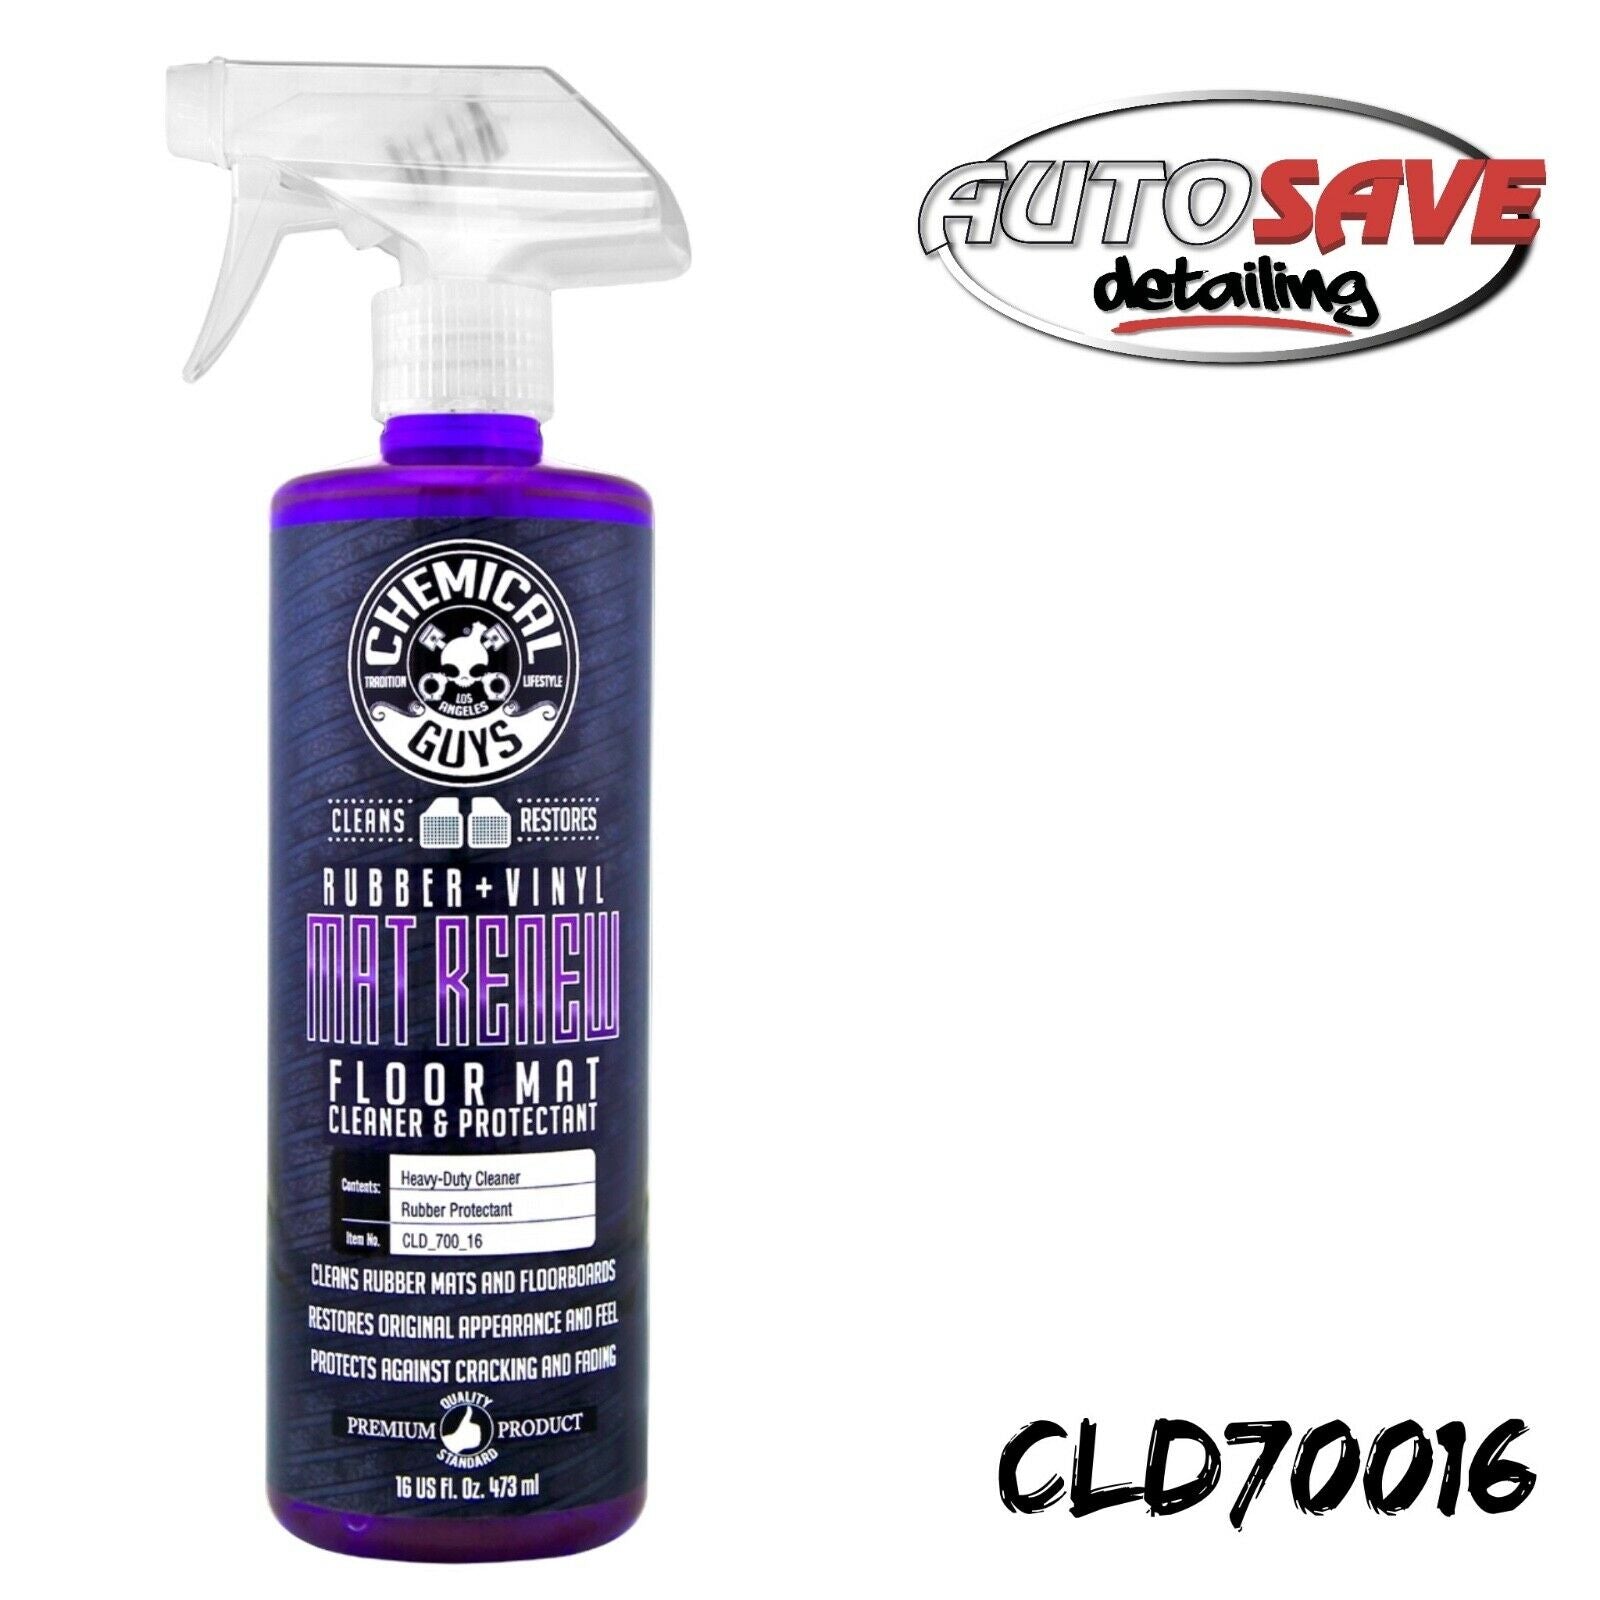 Chemical Guys Leather Conditioner 16oz + 2 Microfiber Towels – Detailing  Connect